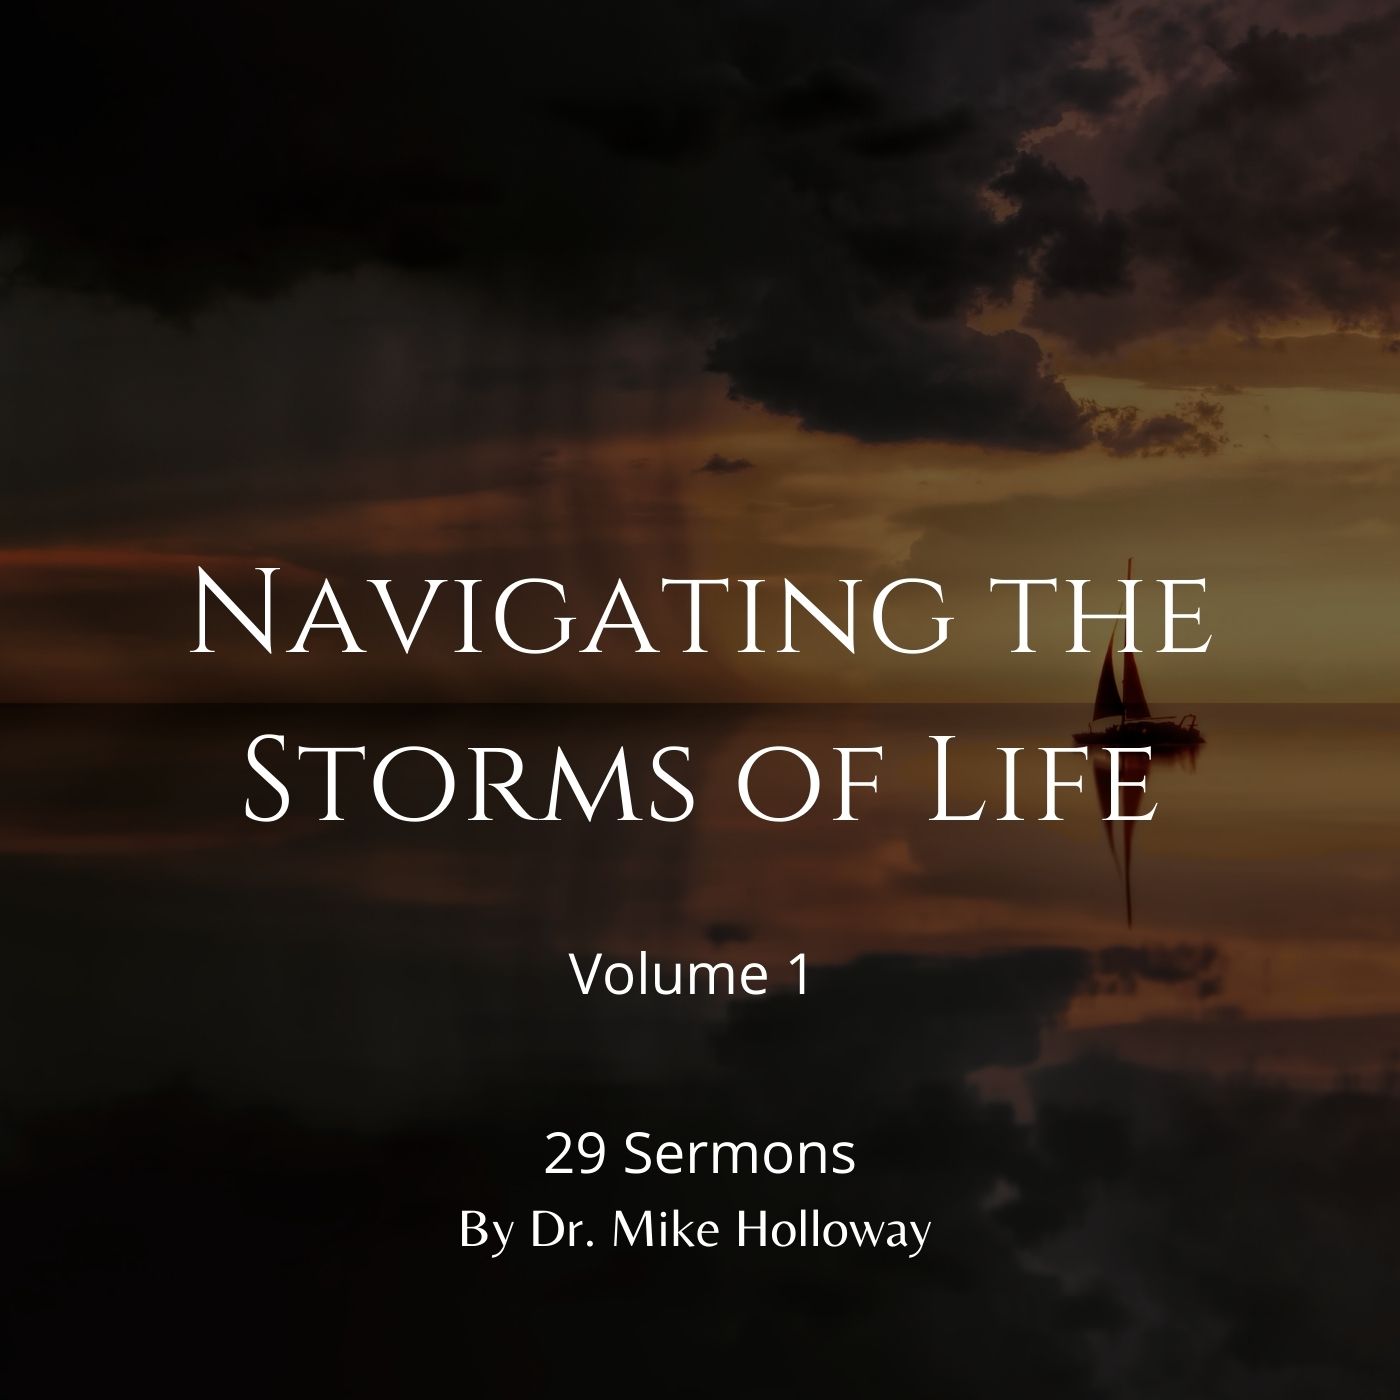 Navigating the Storms of Life Volume 1